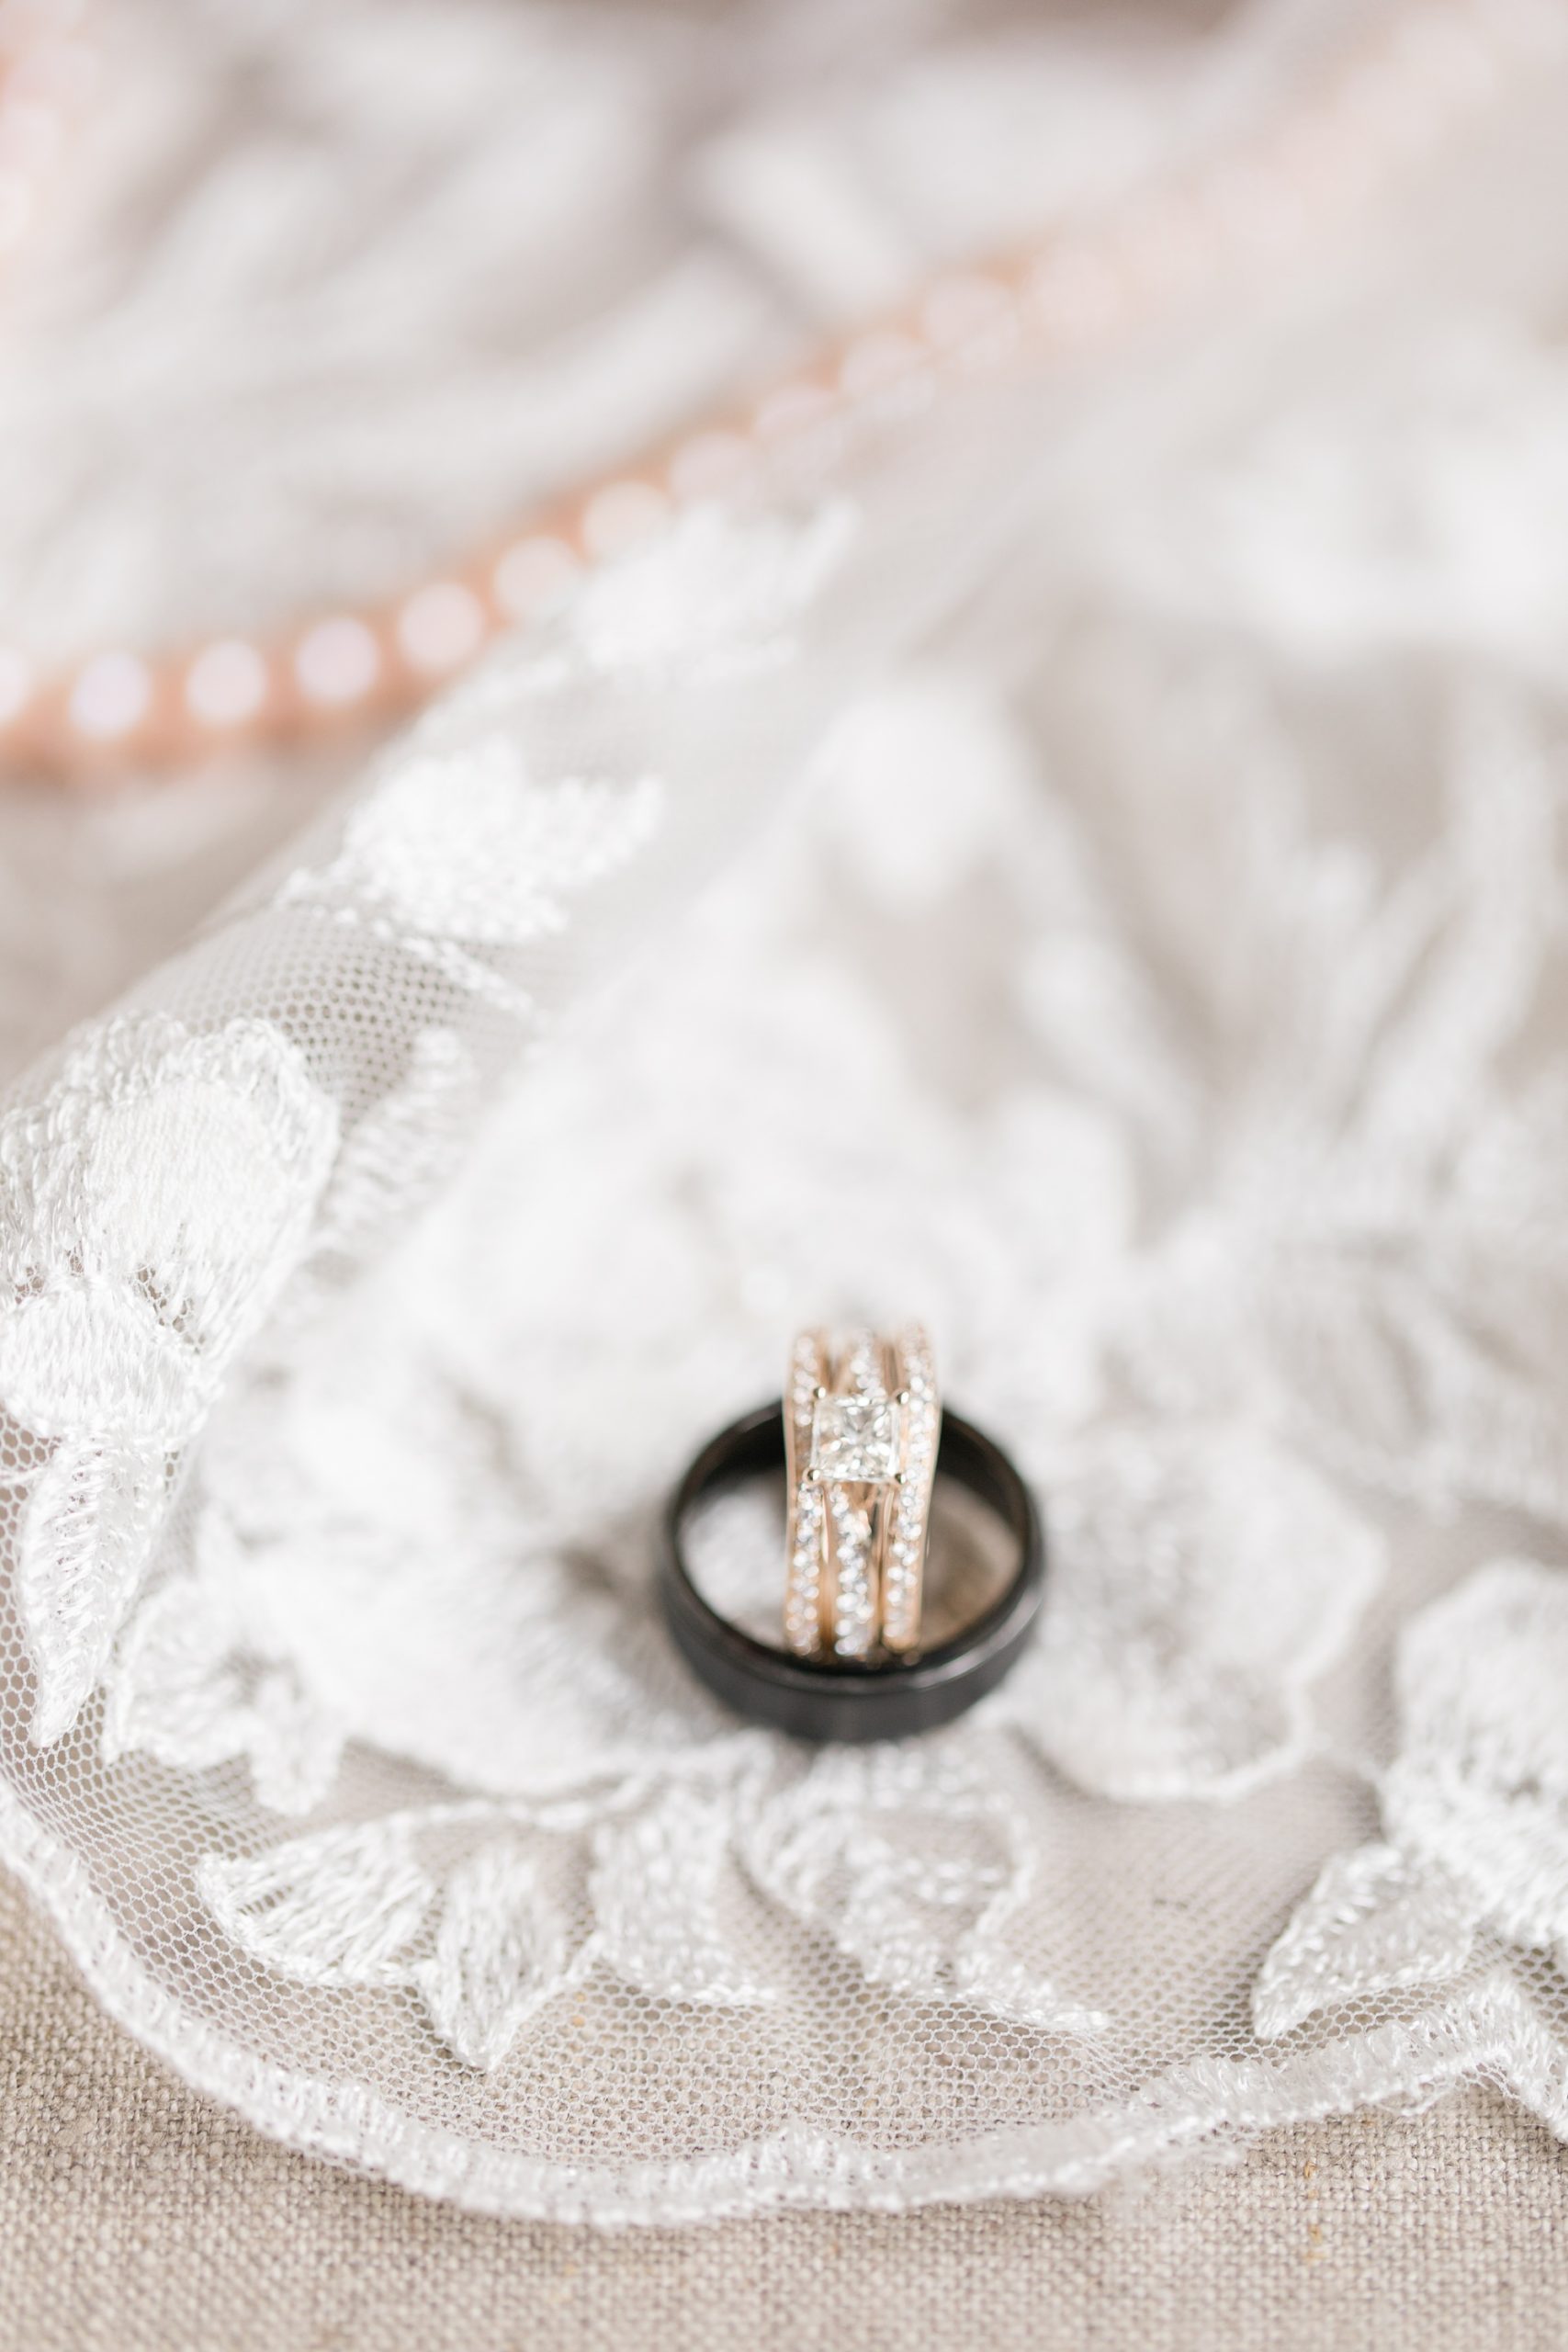 rings rest on lace veil